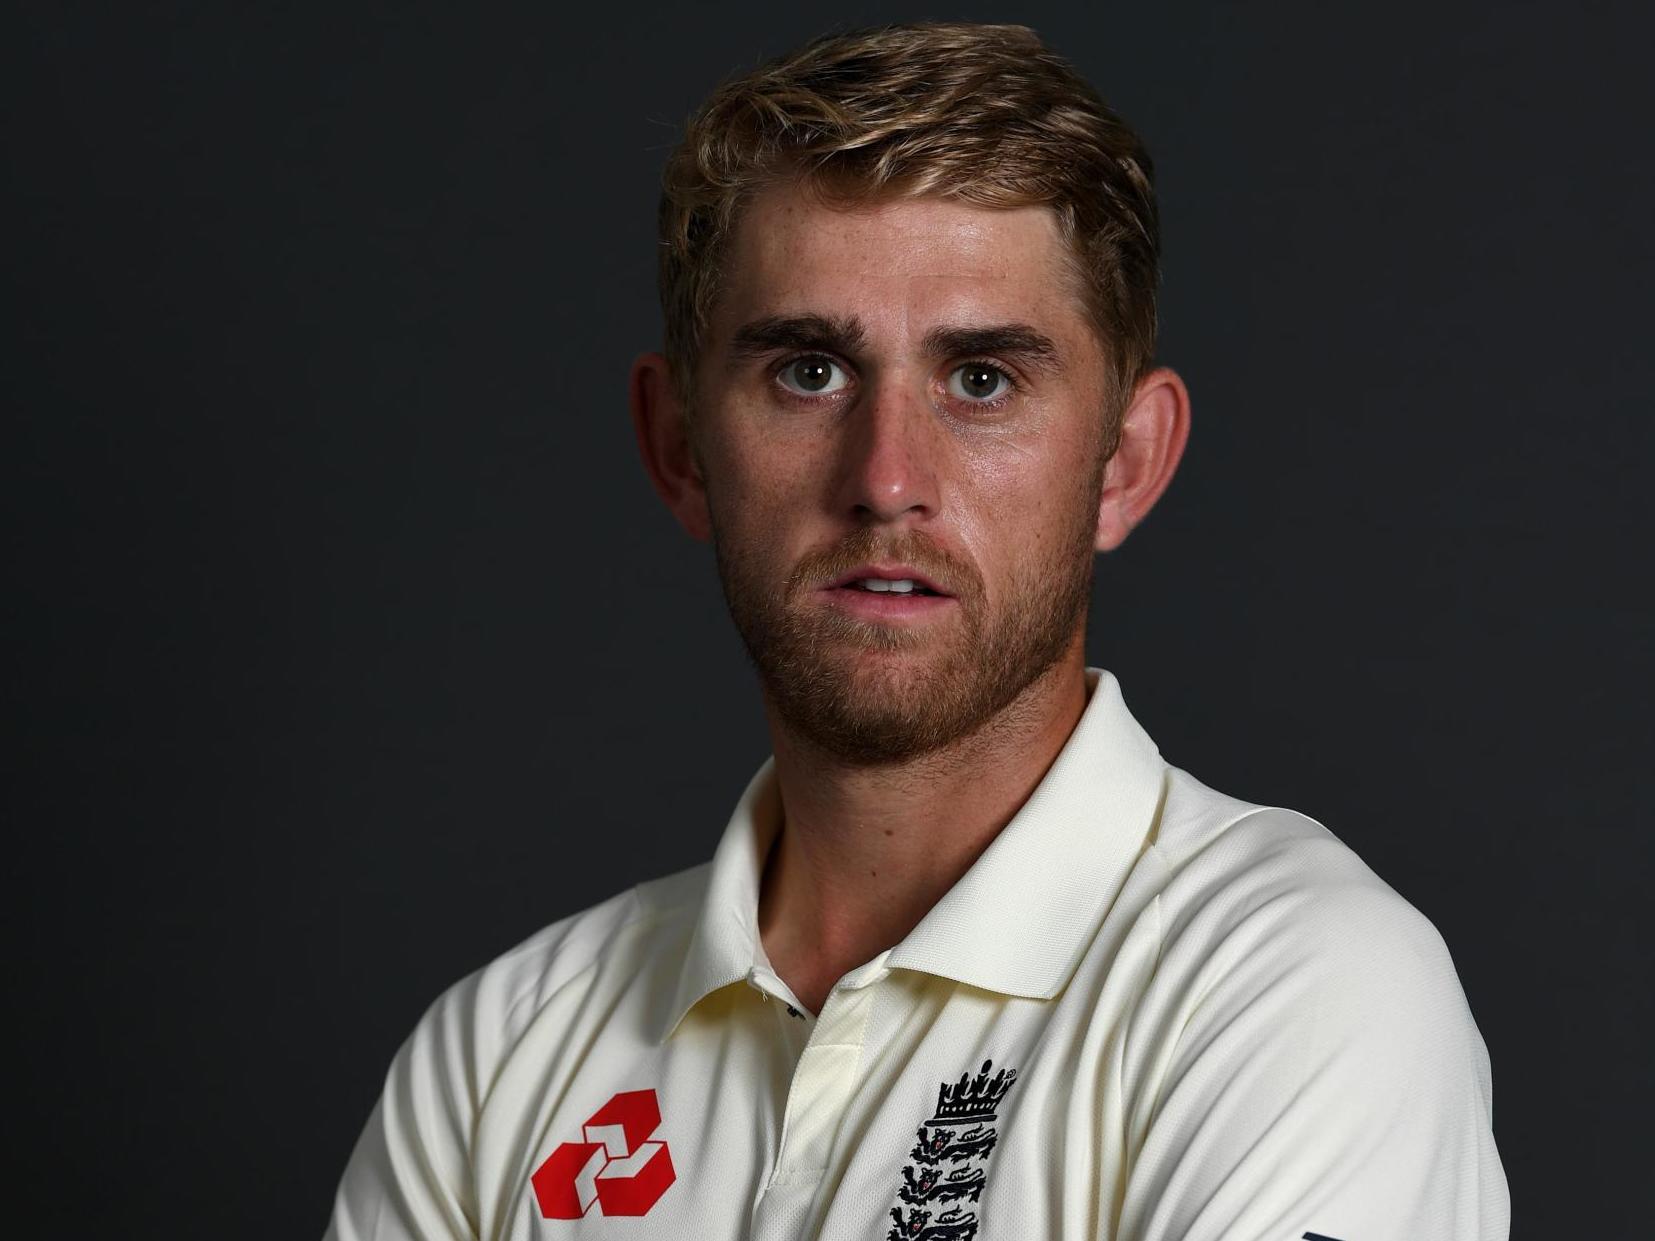 Olly Stone is set to make his England Test match debut vs the West Indies